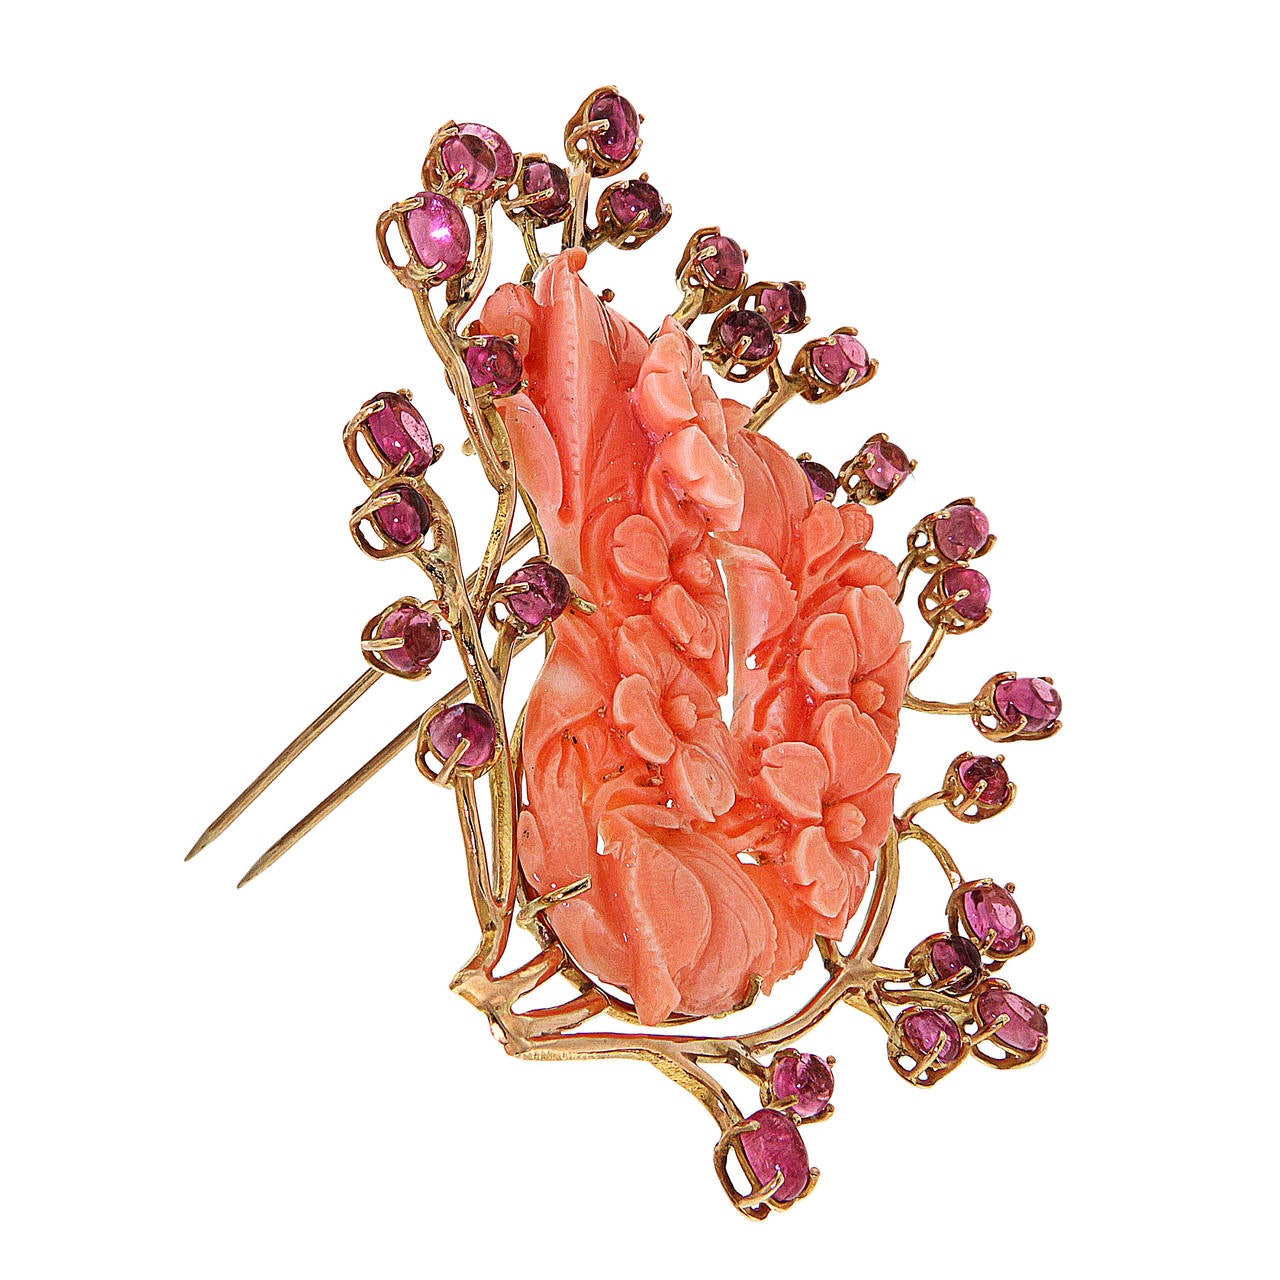 Very stylish and romantic brooch handcrafted in rose gold 18 karat with rare Momo coral dog rose-shape carved 77.50 ctw and rose tourmalines 11.90 ctw.

Handcrafted in: 18 karat rose gold.
Natural Momo coral: 77.50 ctw.
Natural rose tourmaline: